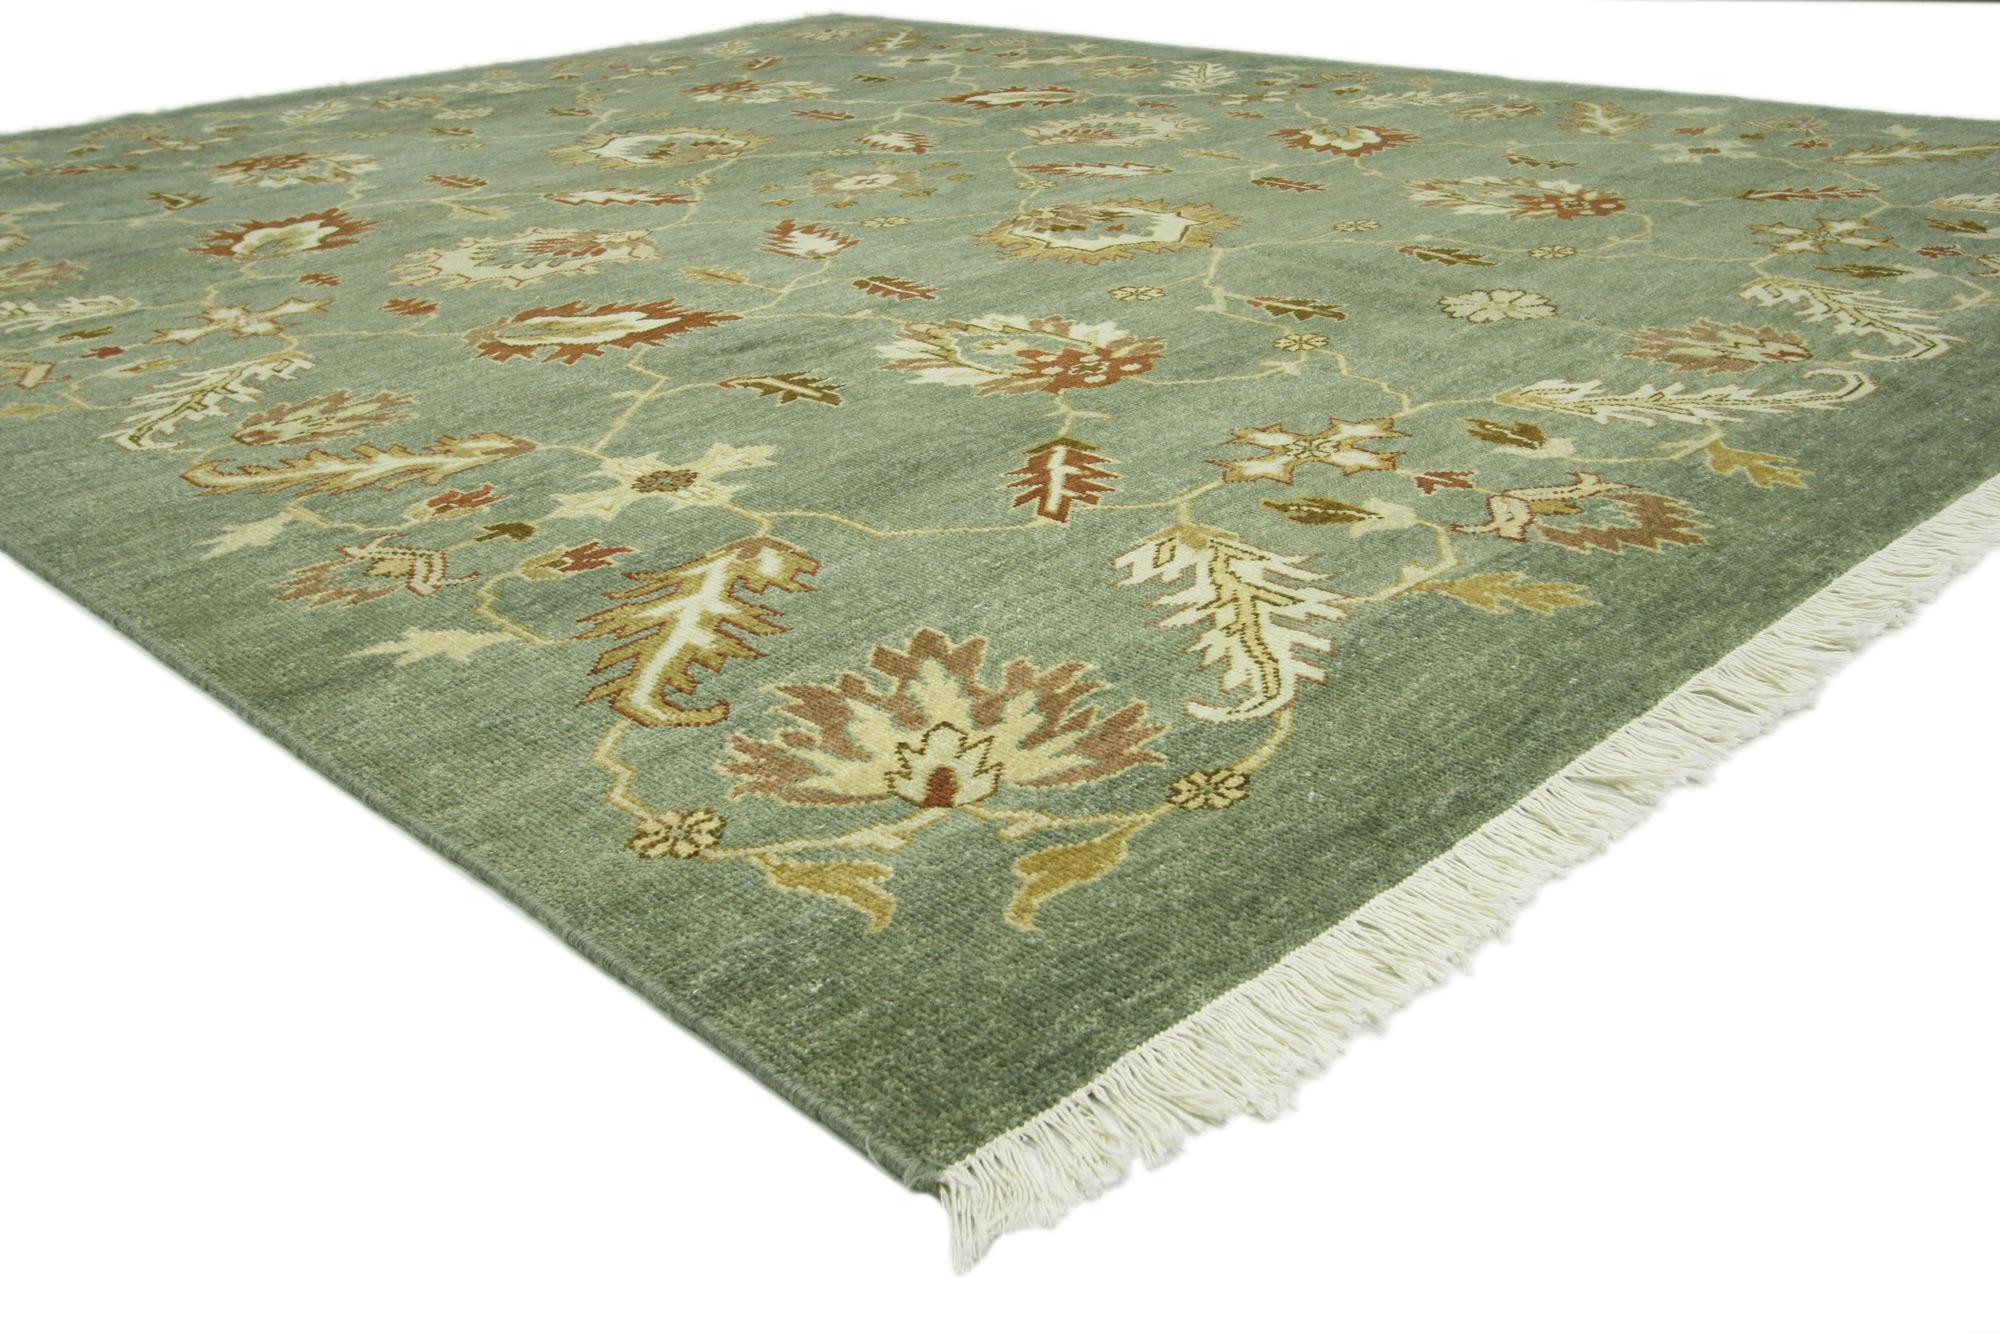 74644 Vintage-Inspired Indian Rug, 07'11 X 10'00. 
Emulating timeless style and understated elegance, this vintage-inspired Indian rug is a captivating vision of woven beauty. The classic botanical design and earthy colorway woven into this piece